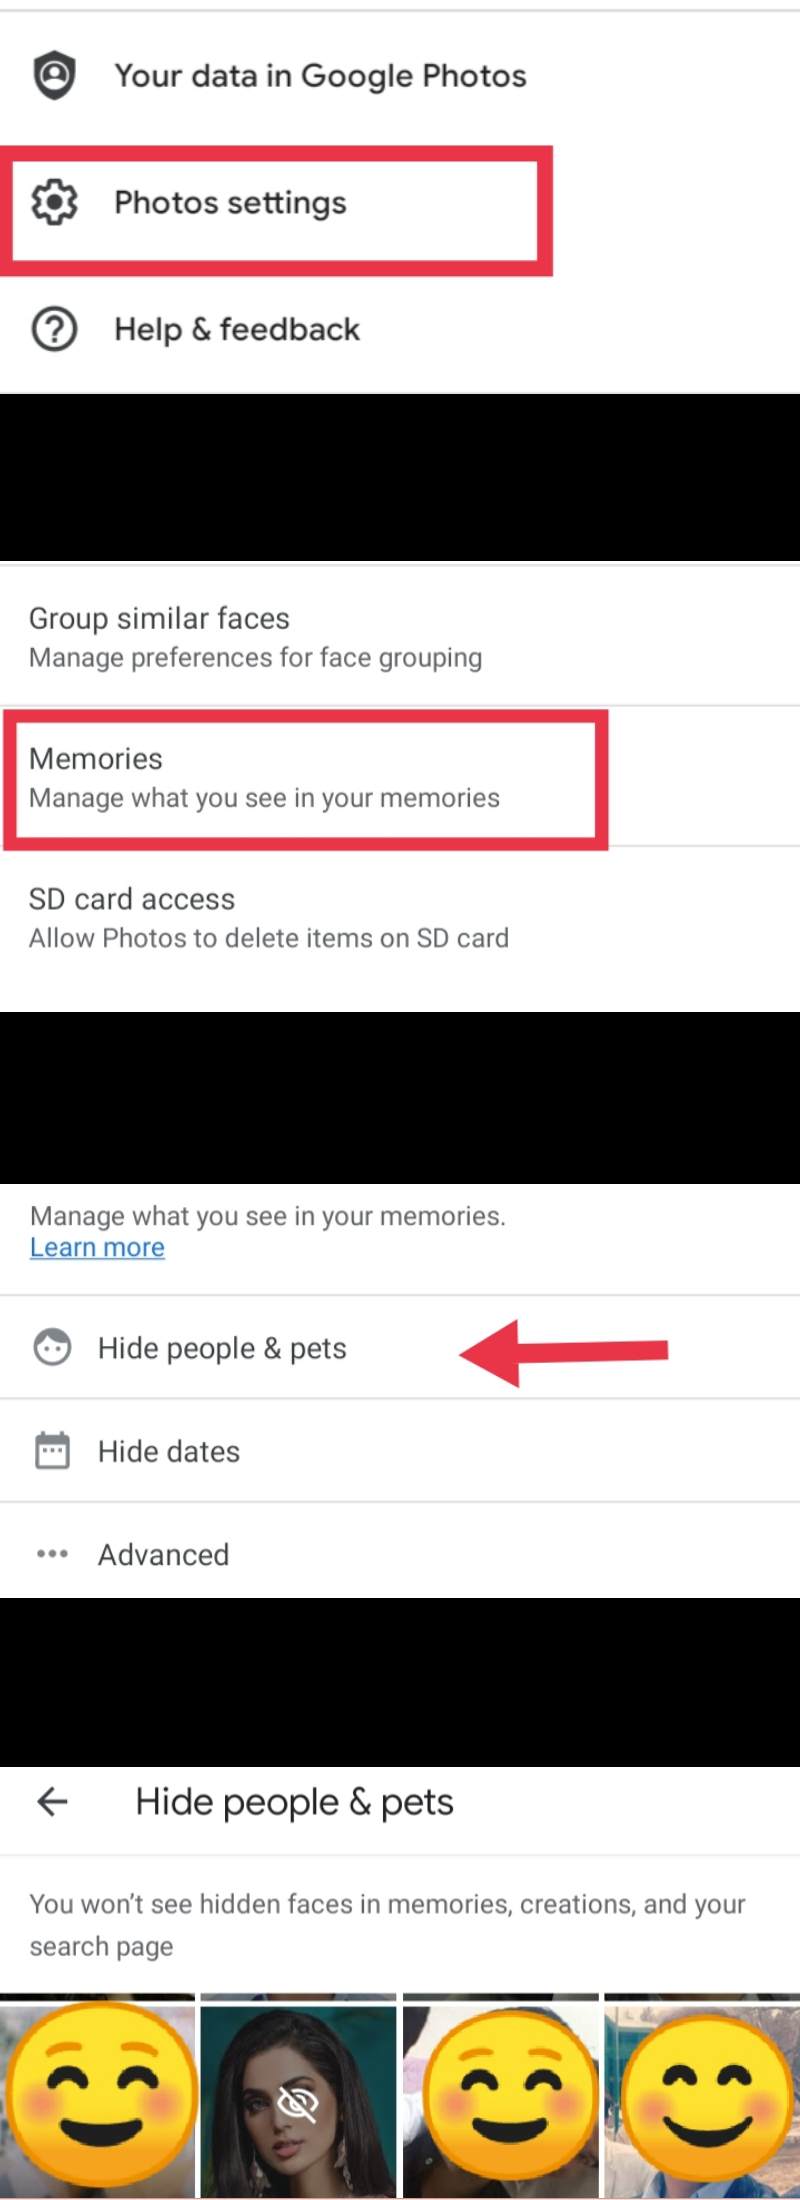 Hide People from your Google Photos Memories (step-by-step guide image)